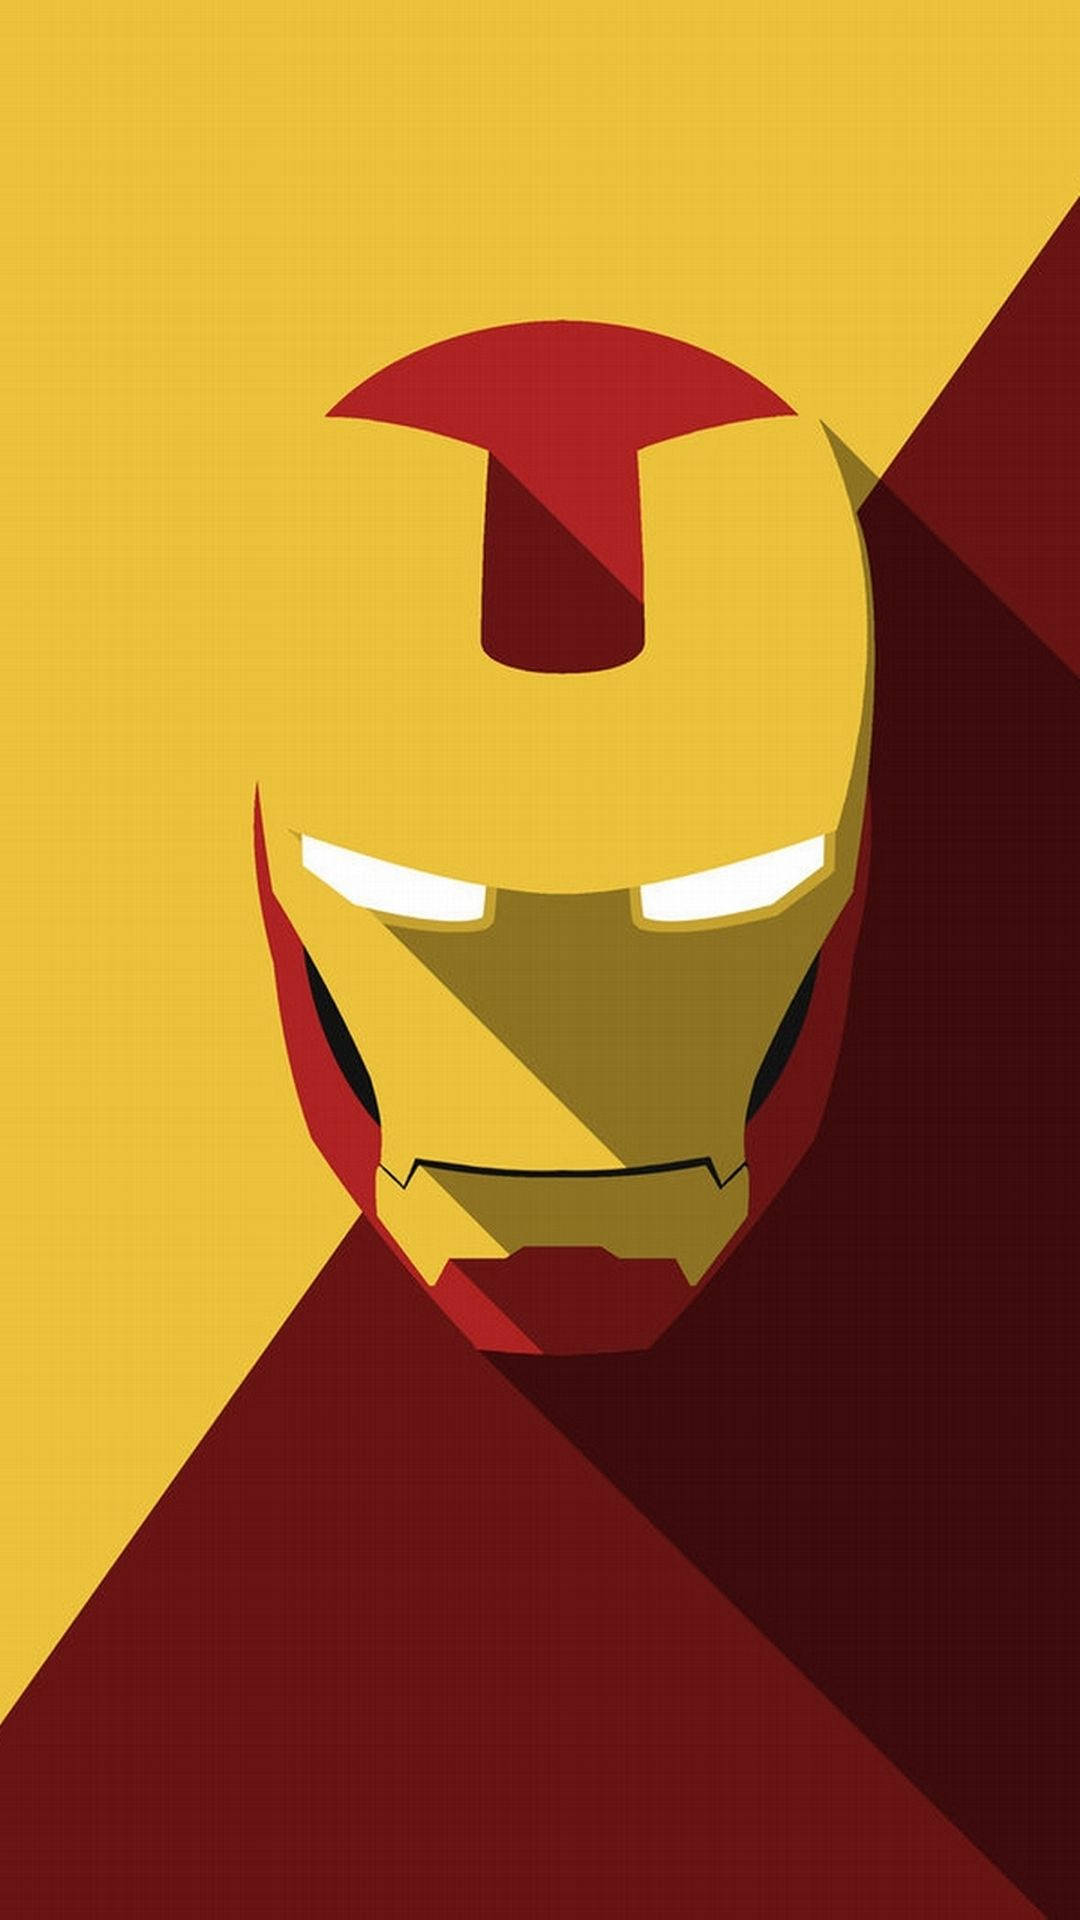 1080X1920 Iron Man Wallpaper and Background